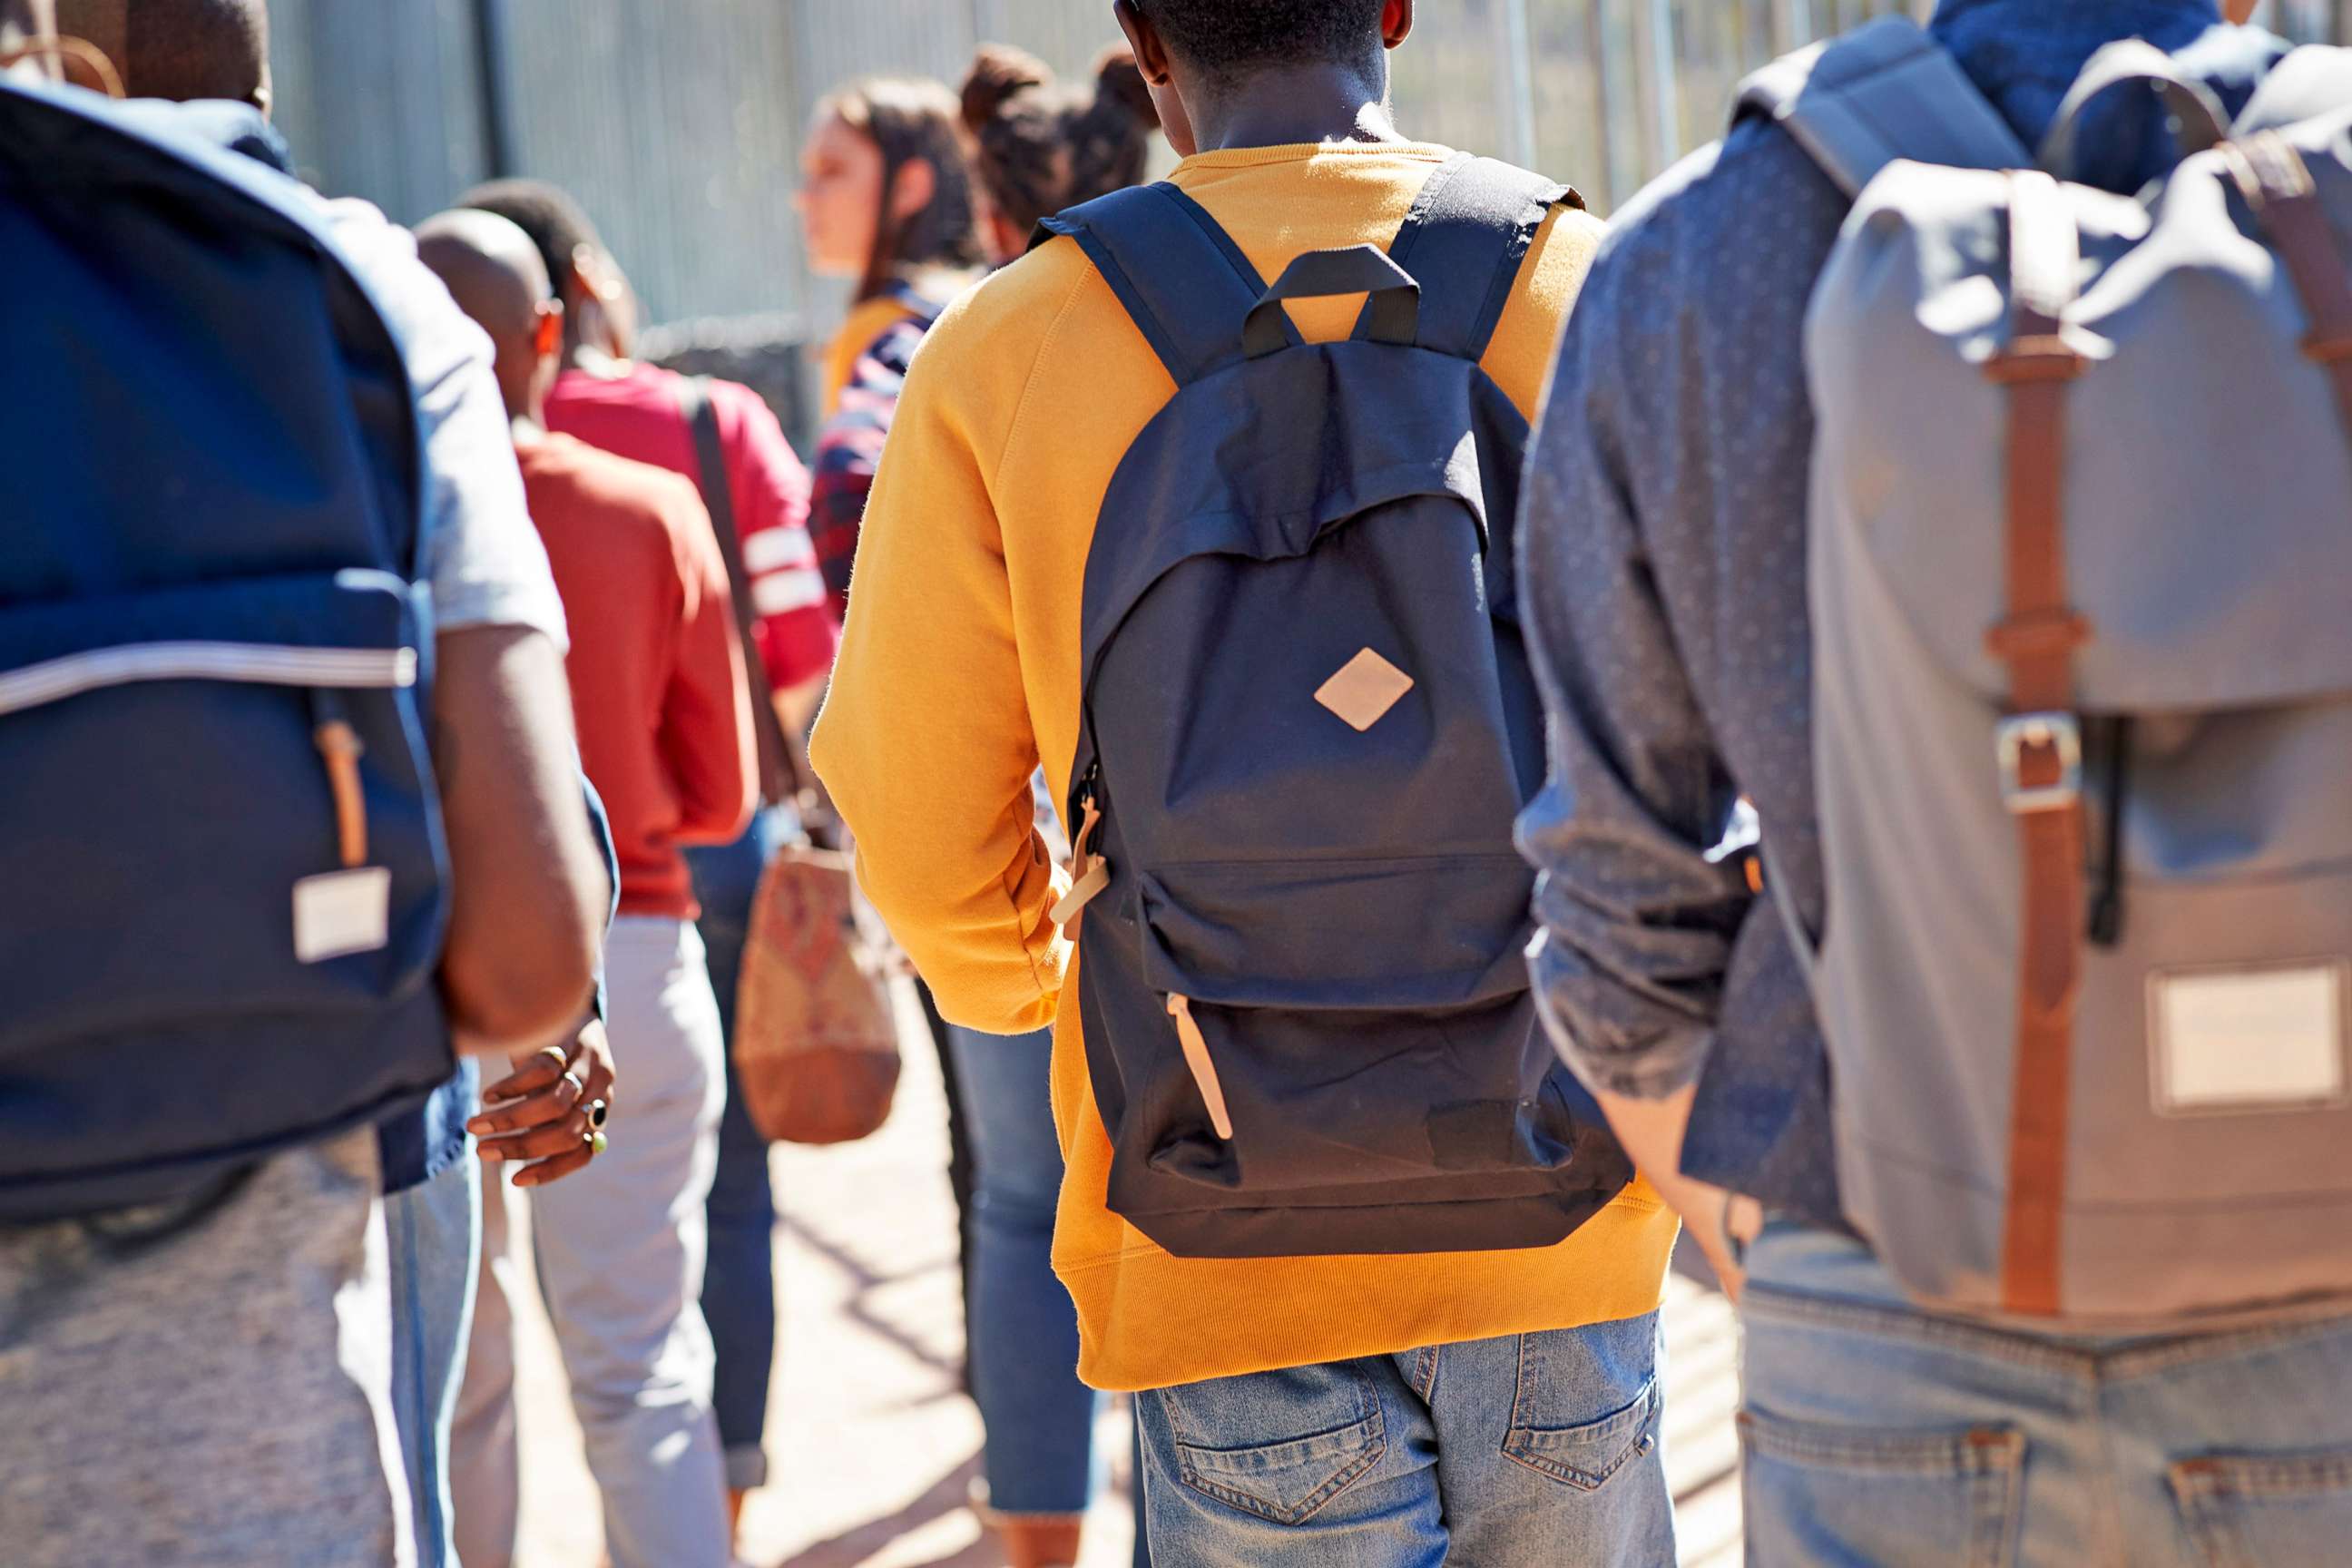 PHOTO: A group of college students walk on their university campus in a stock image.